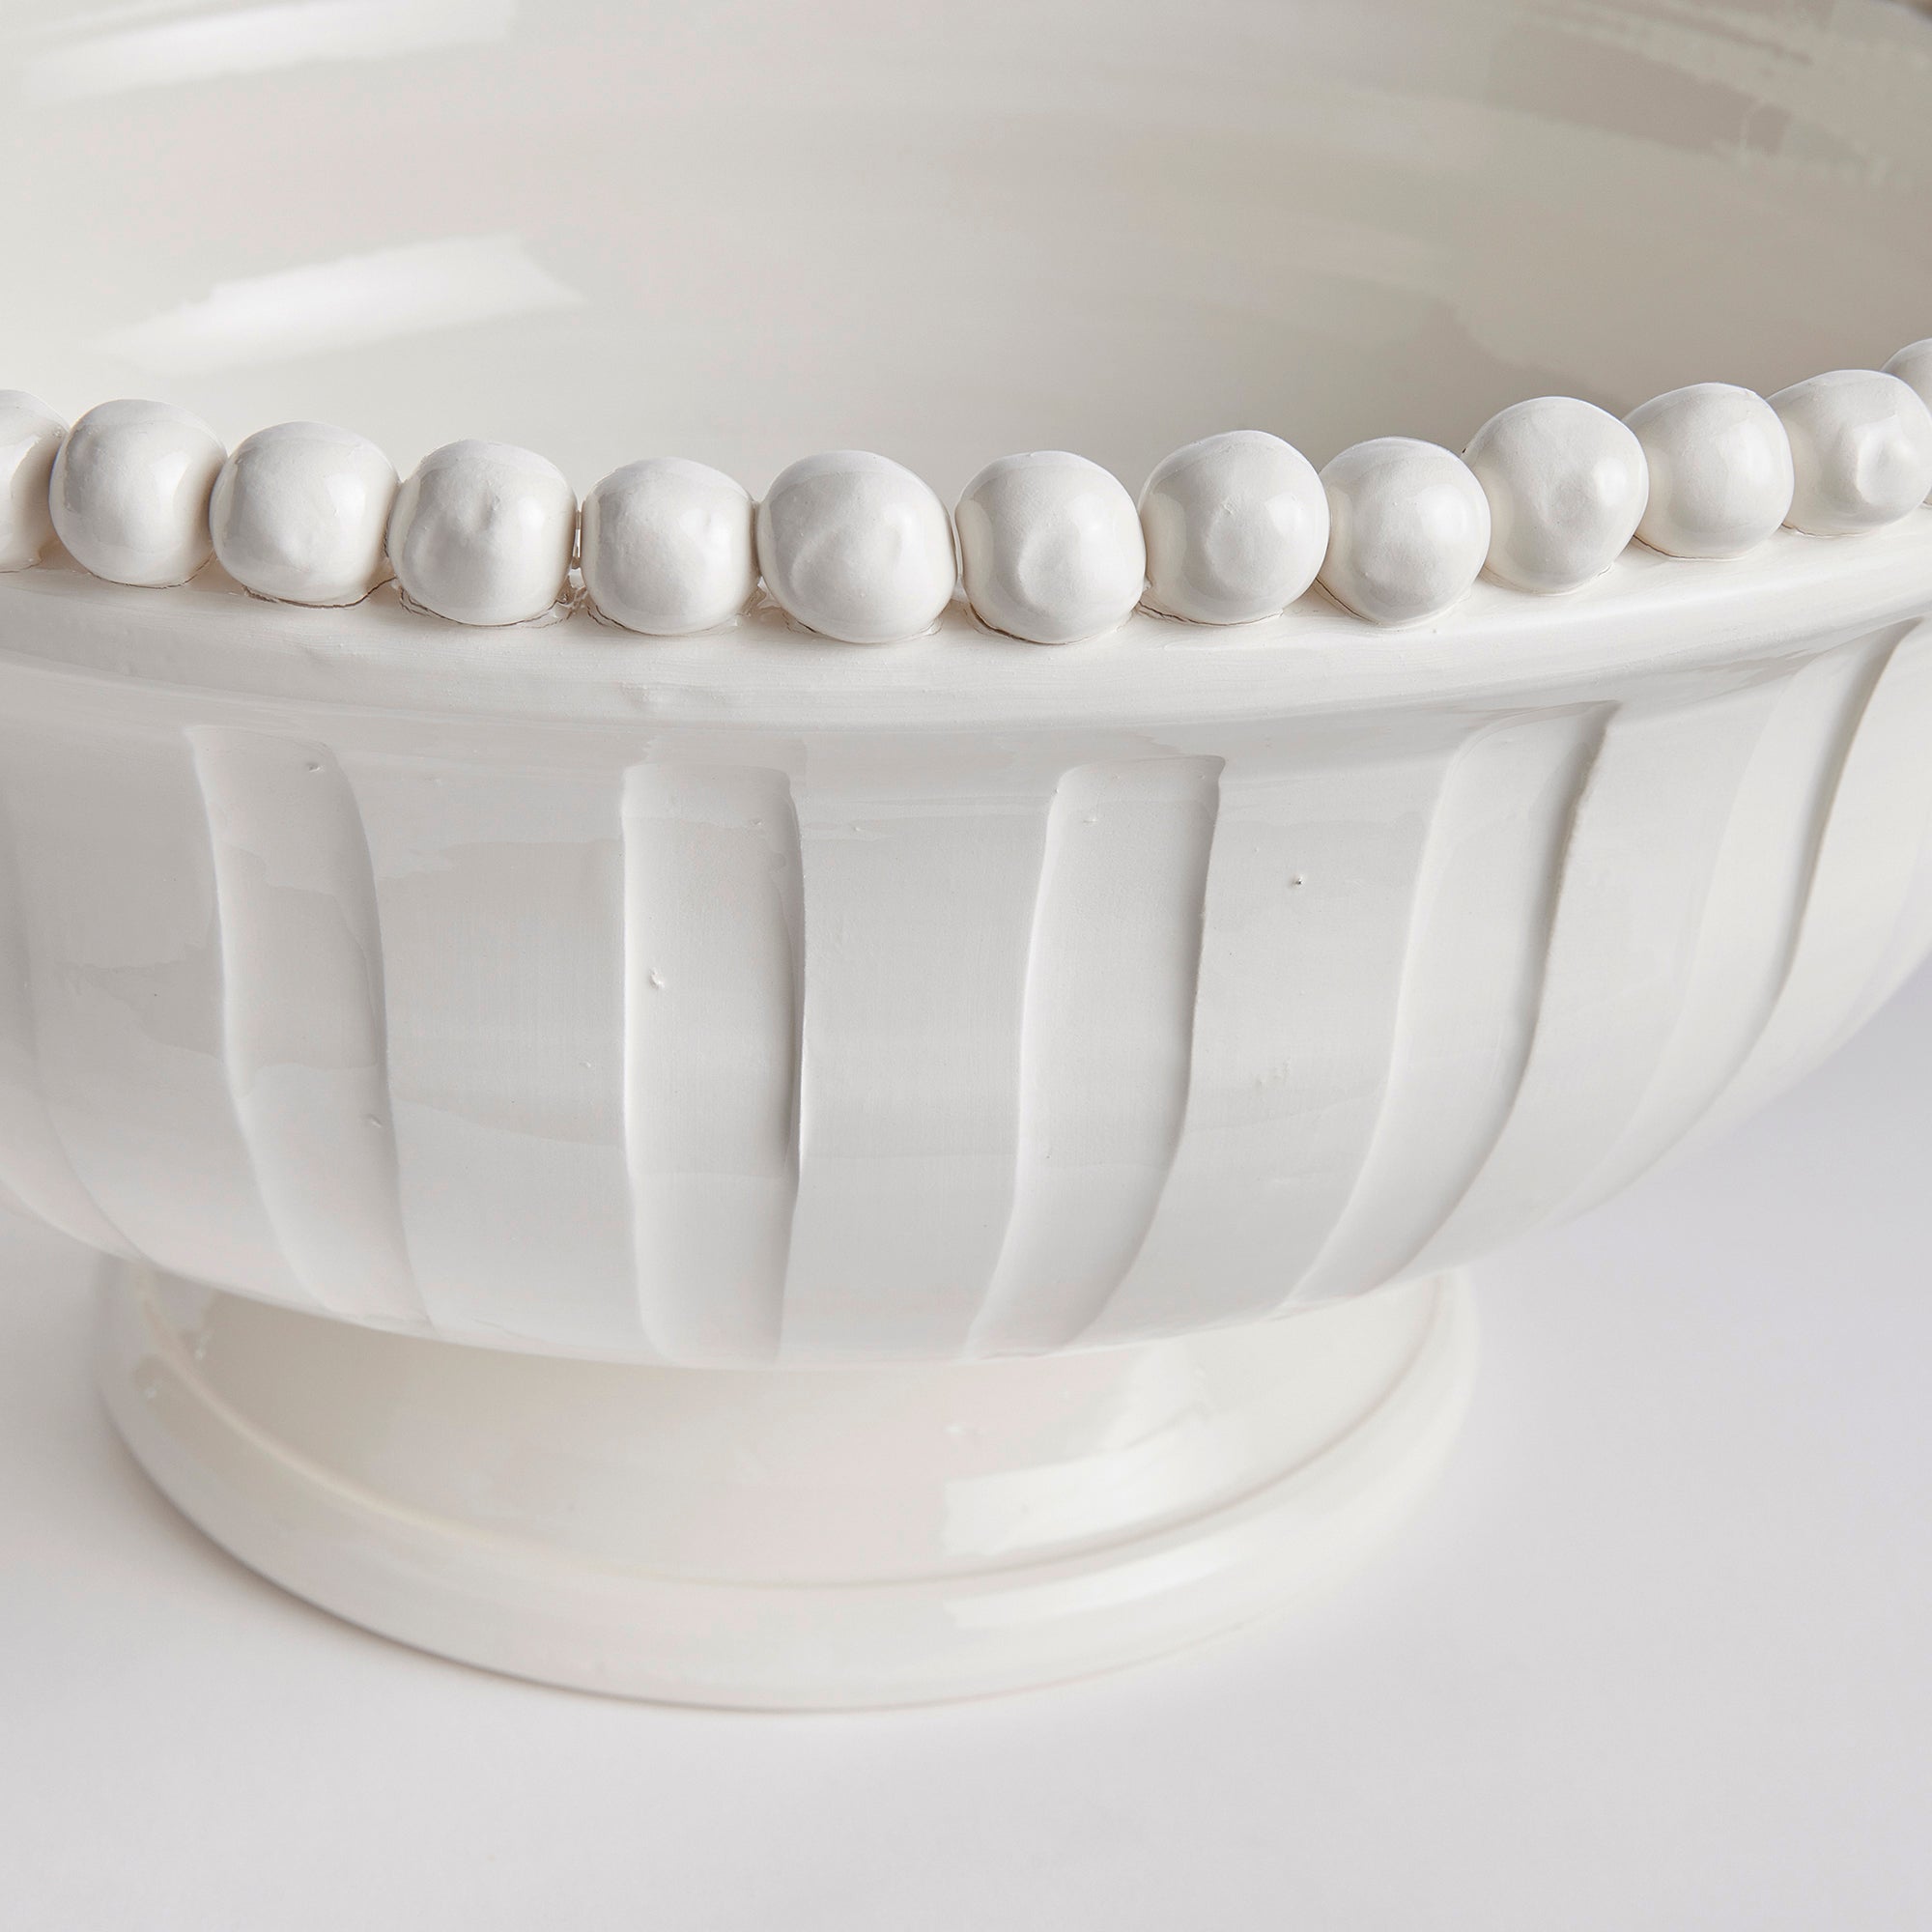 The Coletta Decorative Footed Low Bowl is handmade by Italian artisans in Tuscany, Italy. The subtle ribbing and hand-applied beading are made with genuine attention to detail. With a classic Italian craftsmanship passed down through generations, each piece is a true original. Amethyst Home provides interior design, new construction, custom furniture, and area rugs in the Des Moines metro area.